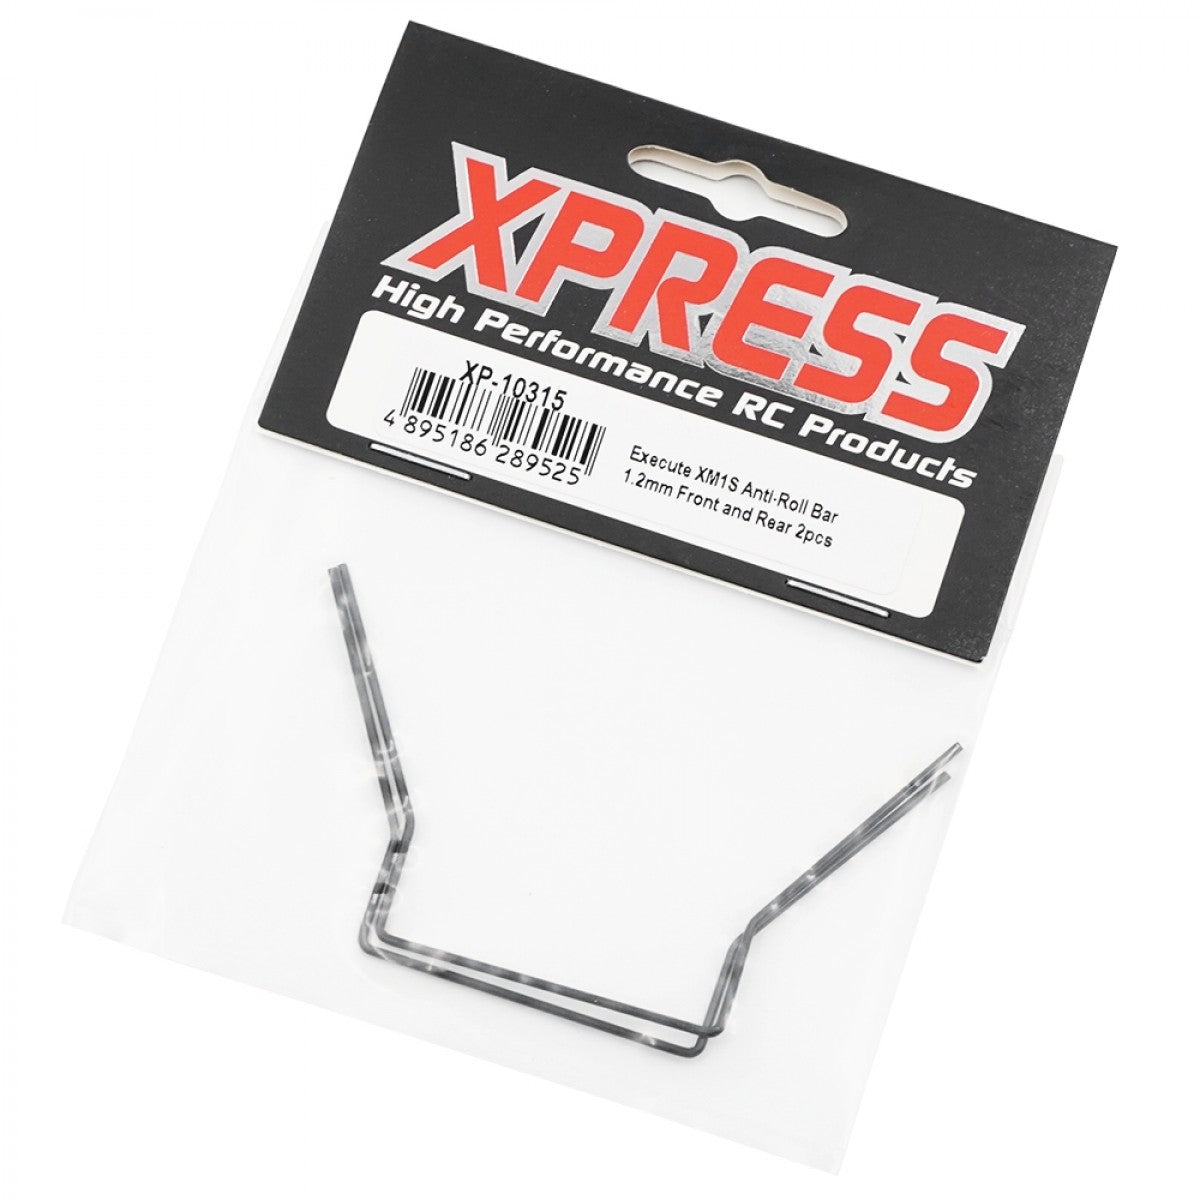 Xpress XP-10315 1.2mm Front and Rear Anti-Roll Bar for XM1 XM1S FM1S